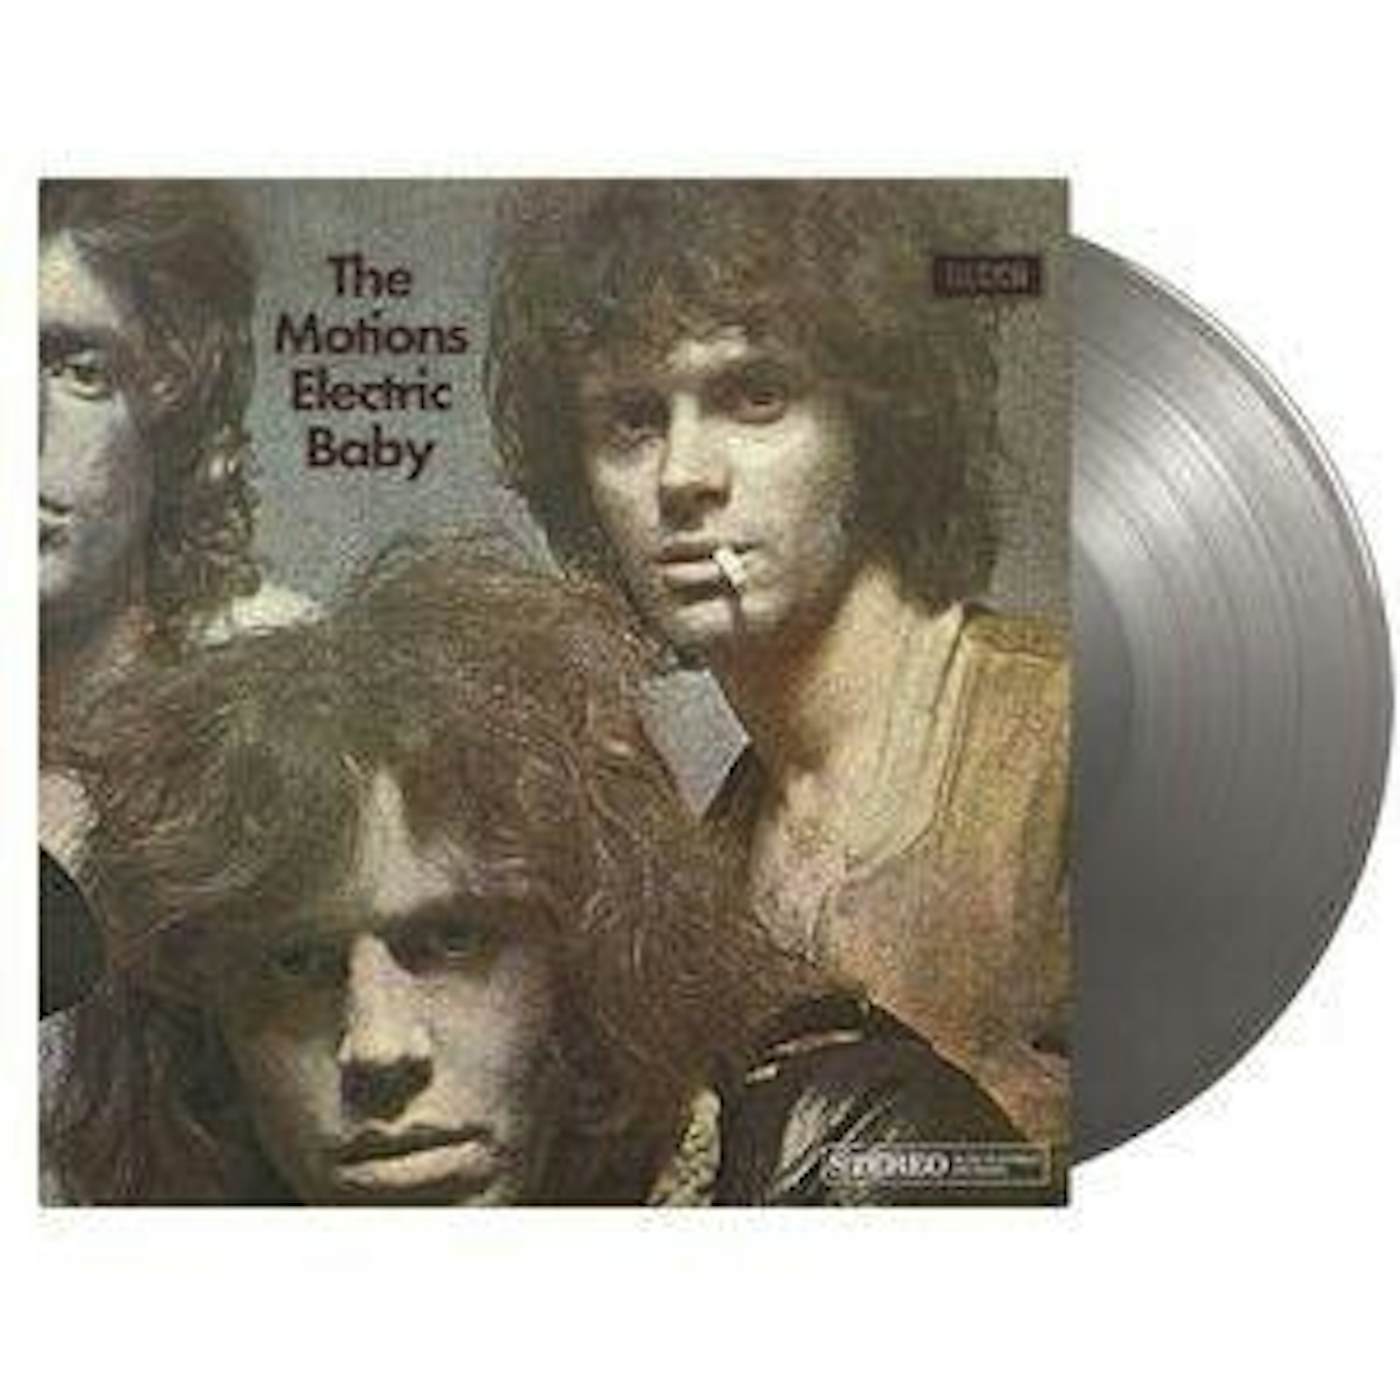 Motions Electric Baby (Silver Vinyl Record/180g) 